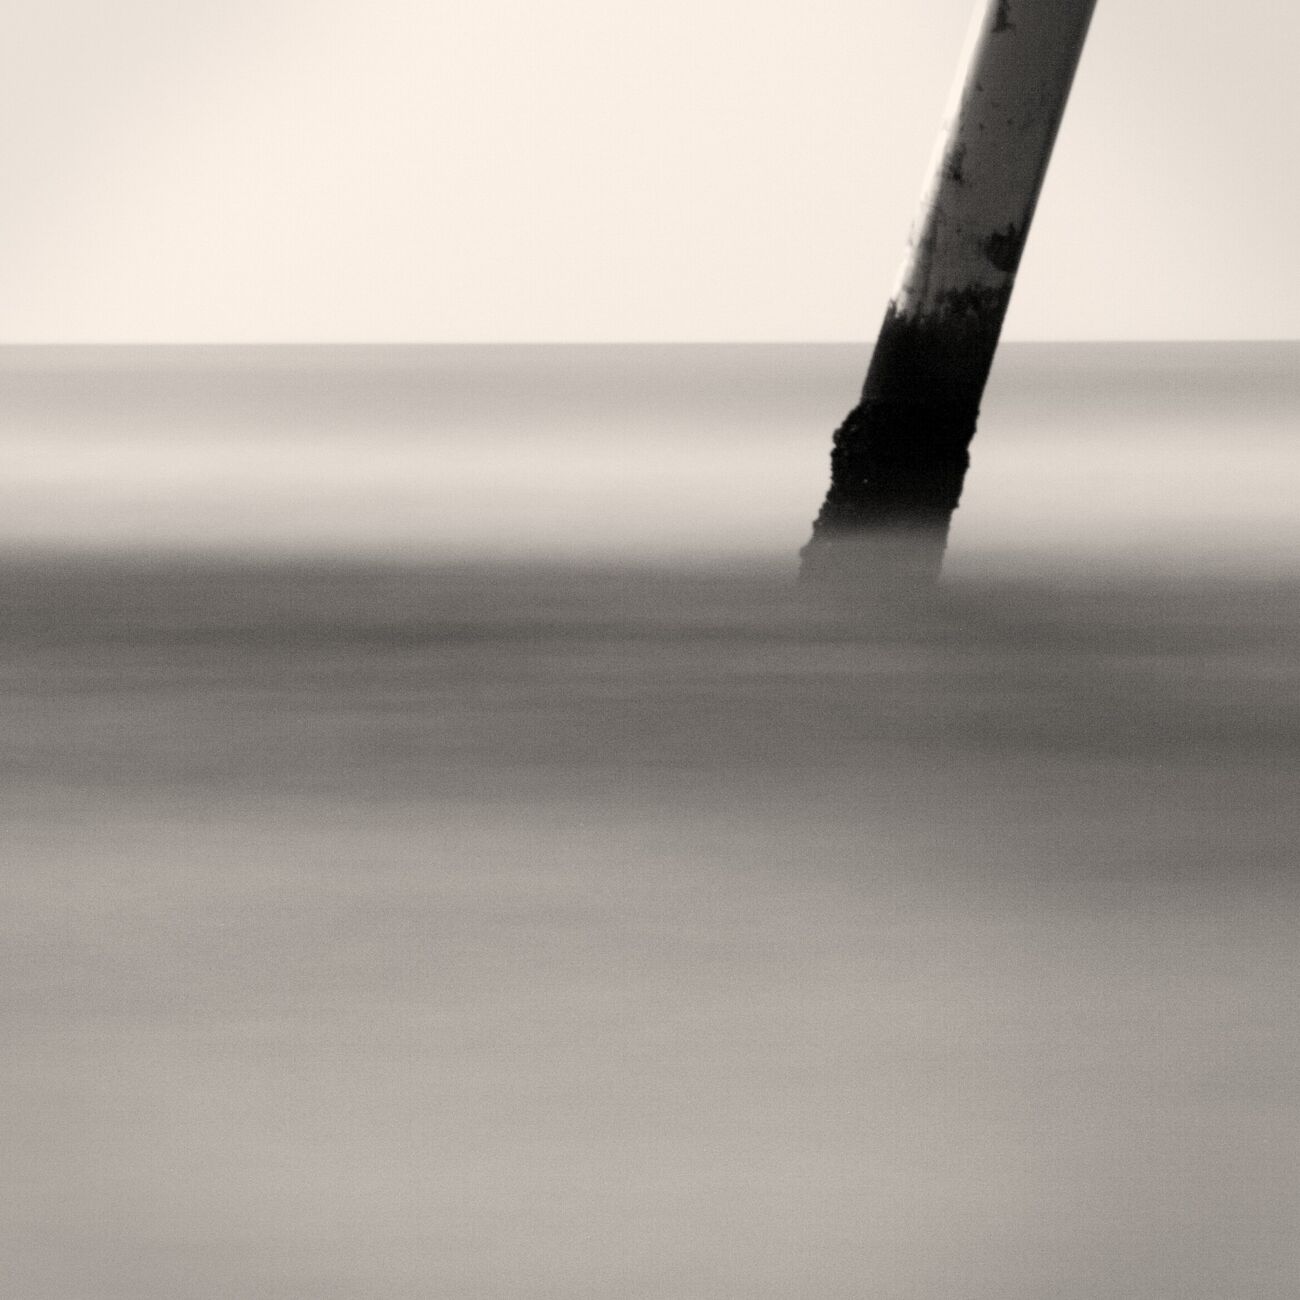 Get a 5.1 x 5.1 in, The dividing line IV. Ref-706-19 - Denis Olivier Art Photography